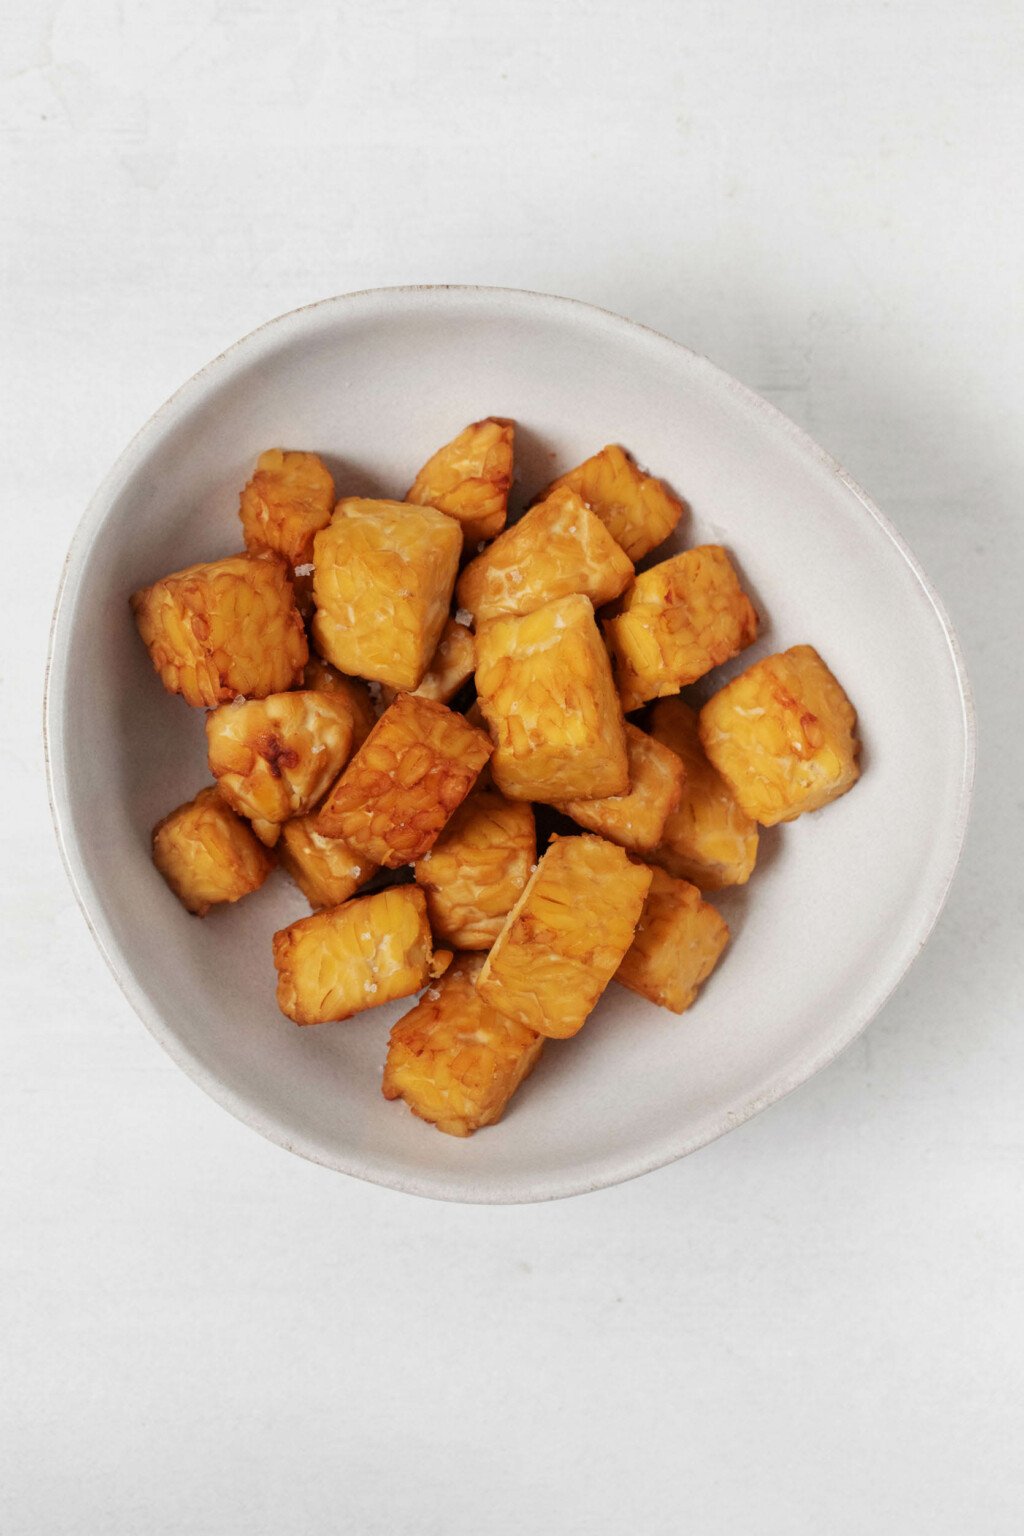 An asymmetrical, ceramic bowl holds browned tempeh "nuggets." It rests on a white surface.